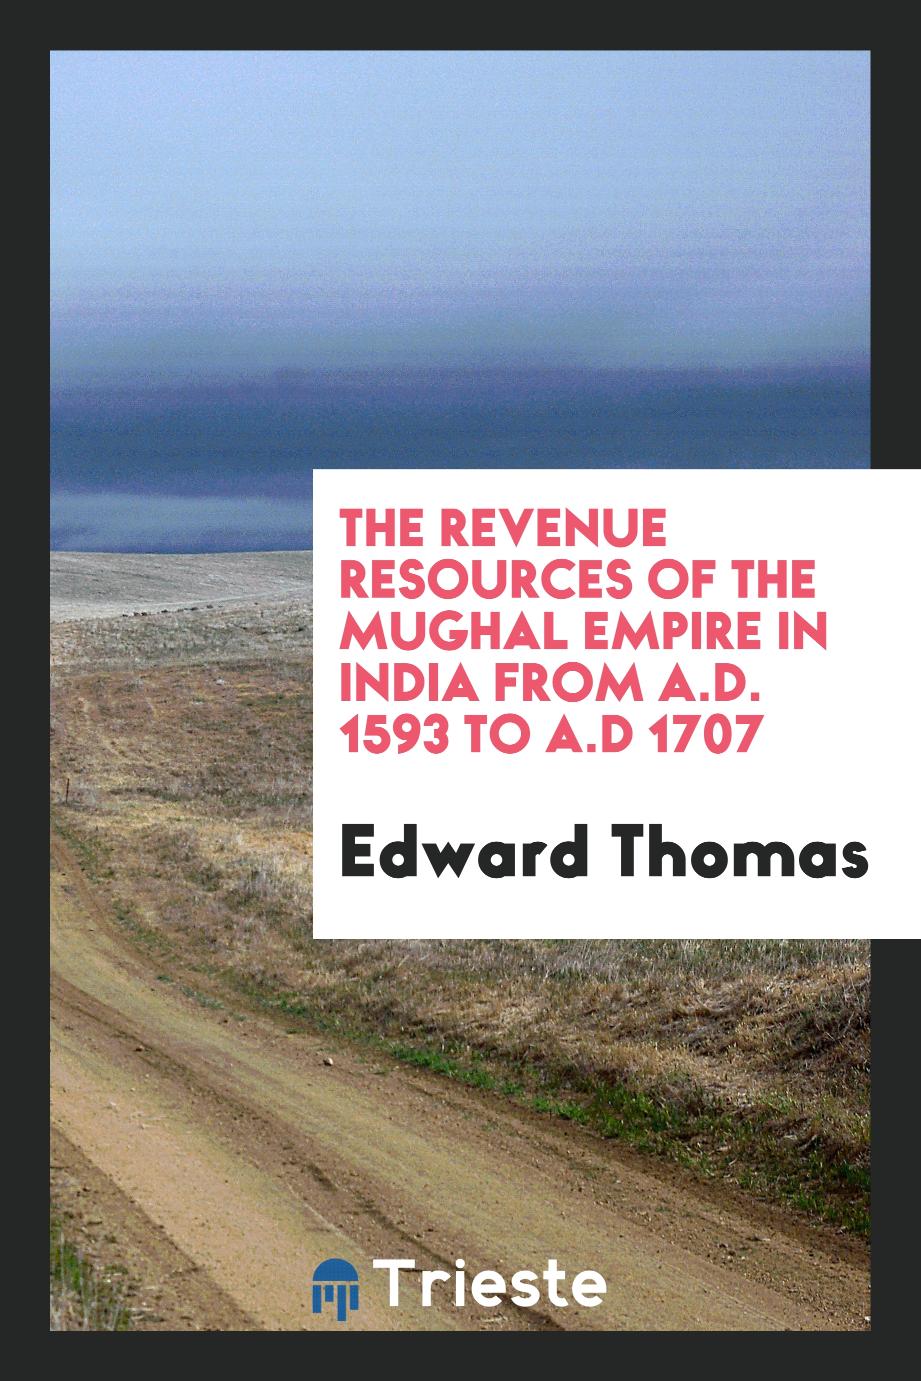 The Revenue Resources of the Mughal Empire in India from A.D. 1593 to A.D 1707